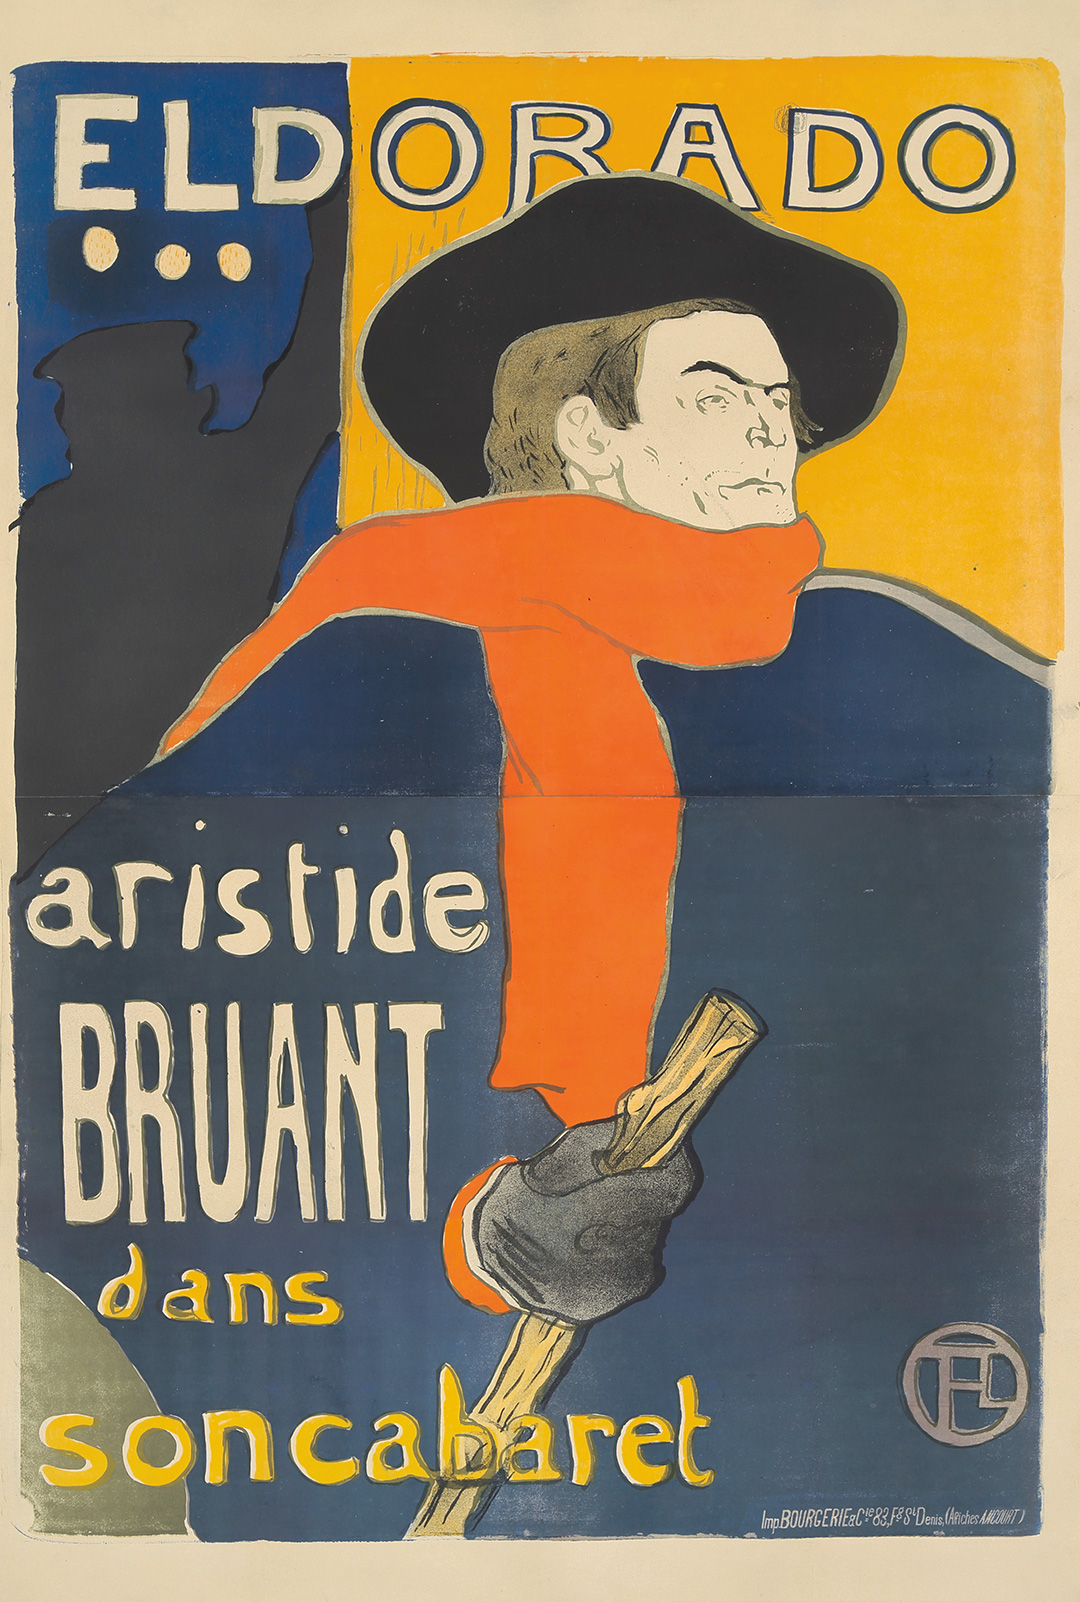 Belle Epoque Icons Mucha and Toulouse-Lautrec Prevail in Poster Auctions International's Rare Posters Auction, July 21st